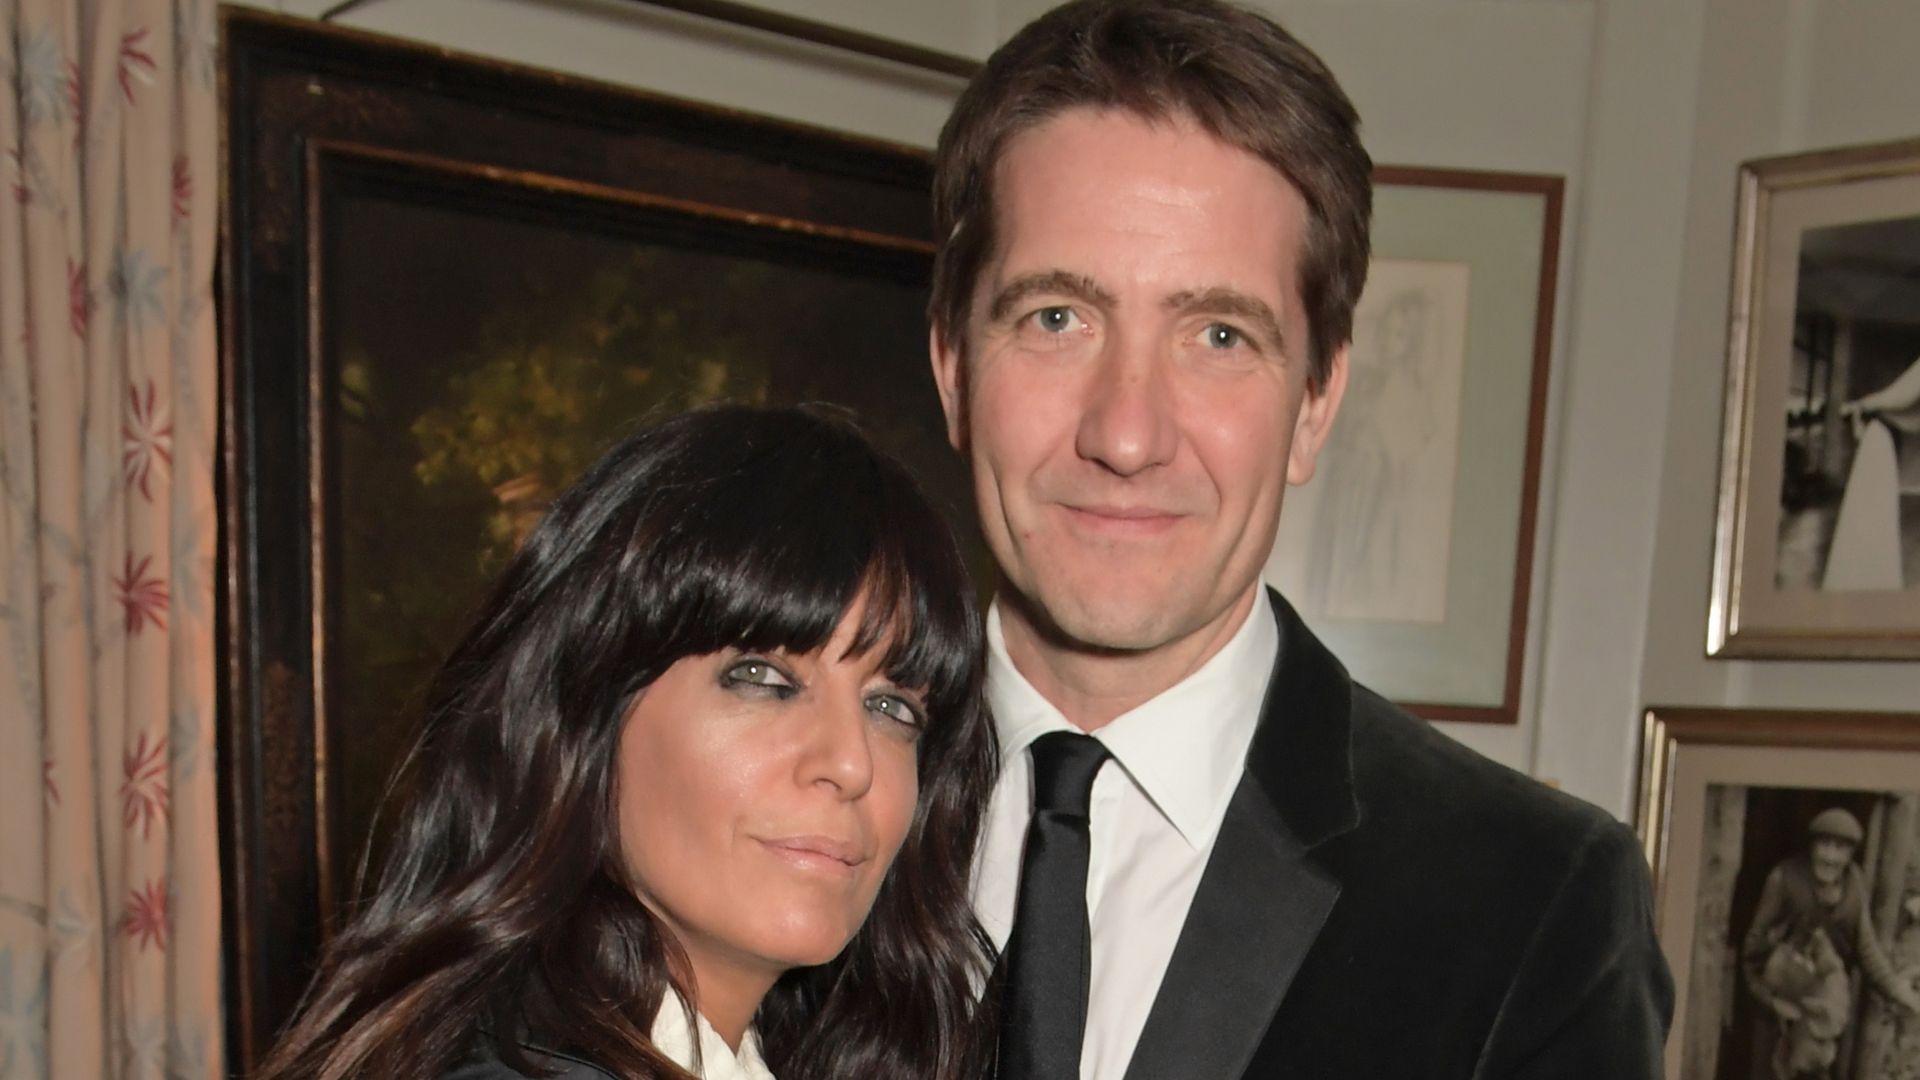 Claudia Winkleman and Kris Thykier attend the Charles Finch & CHANEL Pre-BAFTA Party 